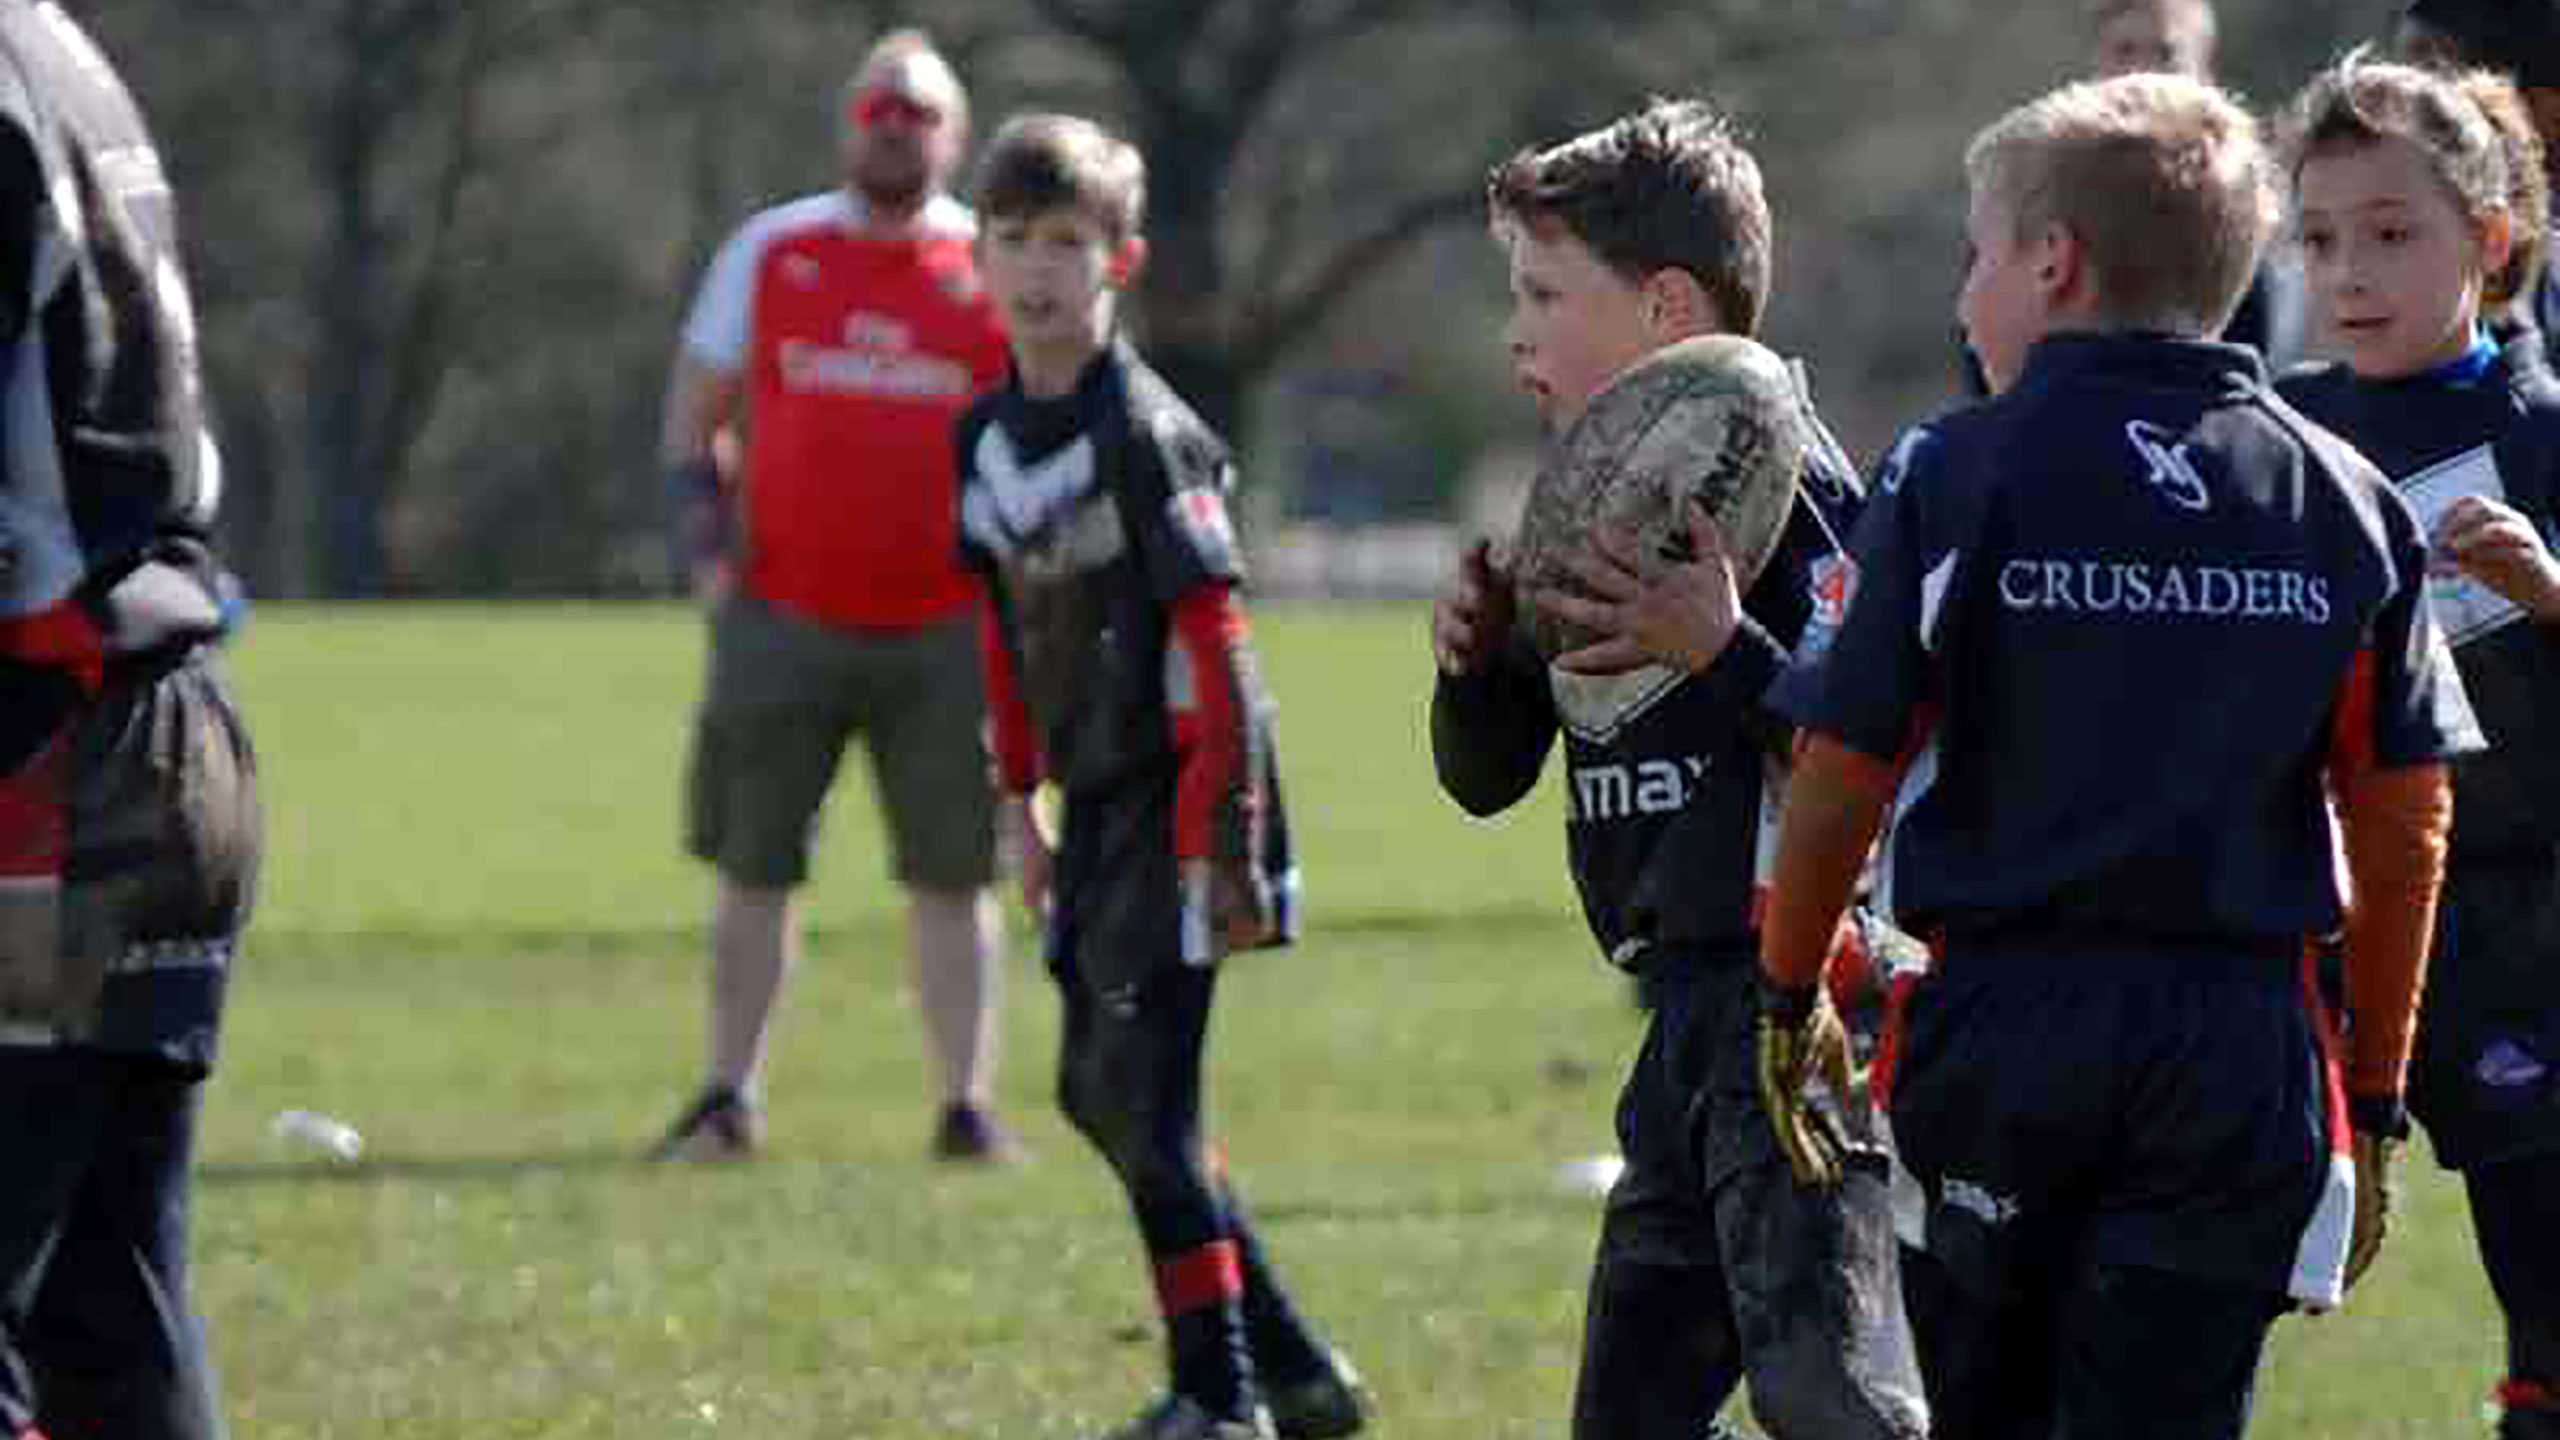 Catterick Crusaders playing rugby